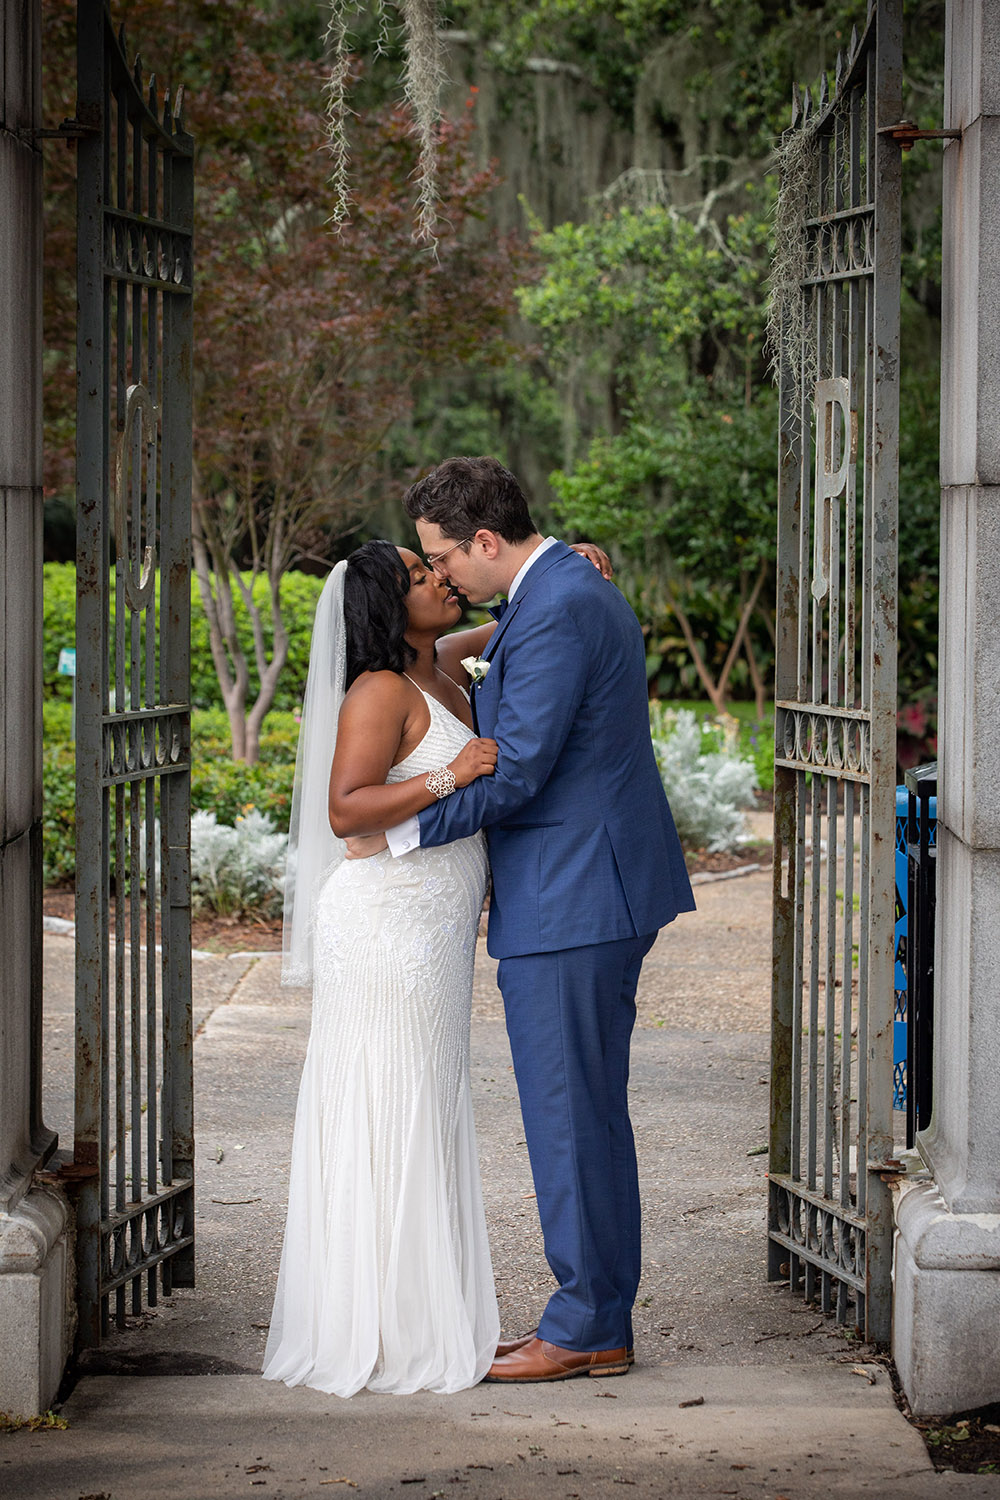 During a break in rain showers, Kiara and Michael were able to take a few photos across the street in City Park. Photo: Brian Jarreau Photography